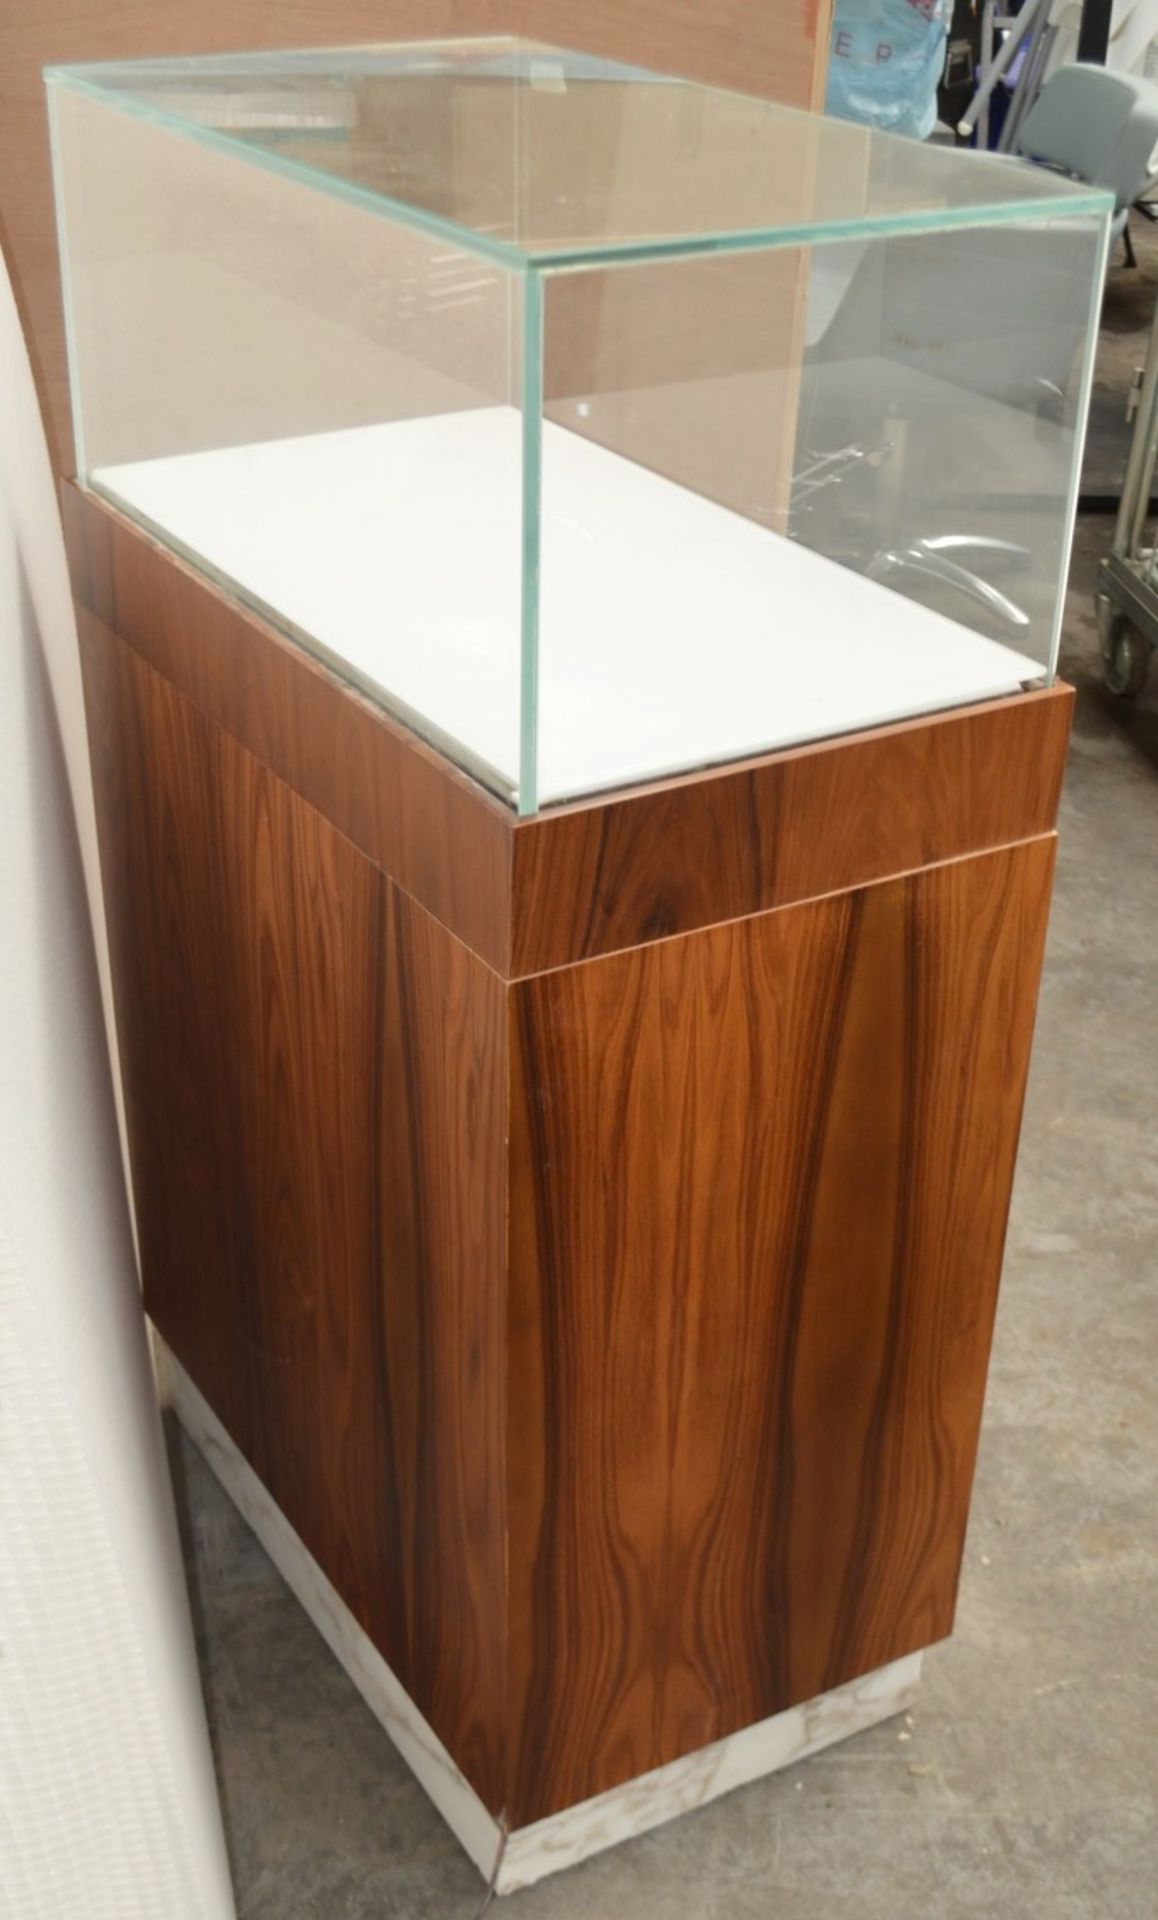 1 x 2-Door Jewellery Display Unit With Slide-apart Glass Top - Dimensions: H120 x W70 x D40cm - Ref: - Image 6 of 6